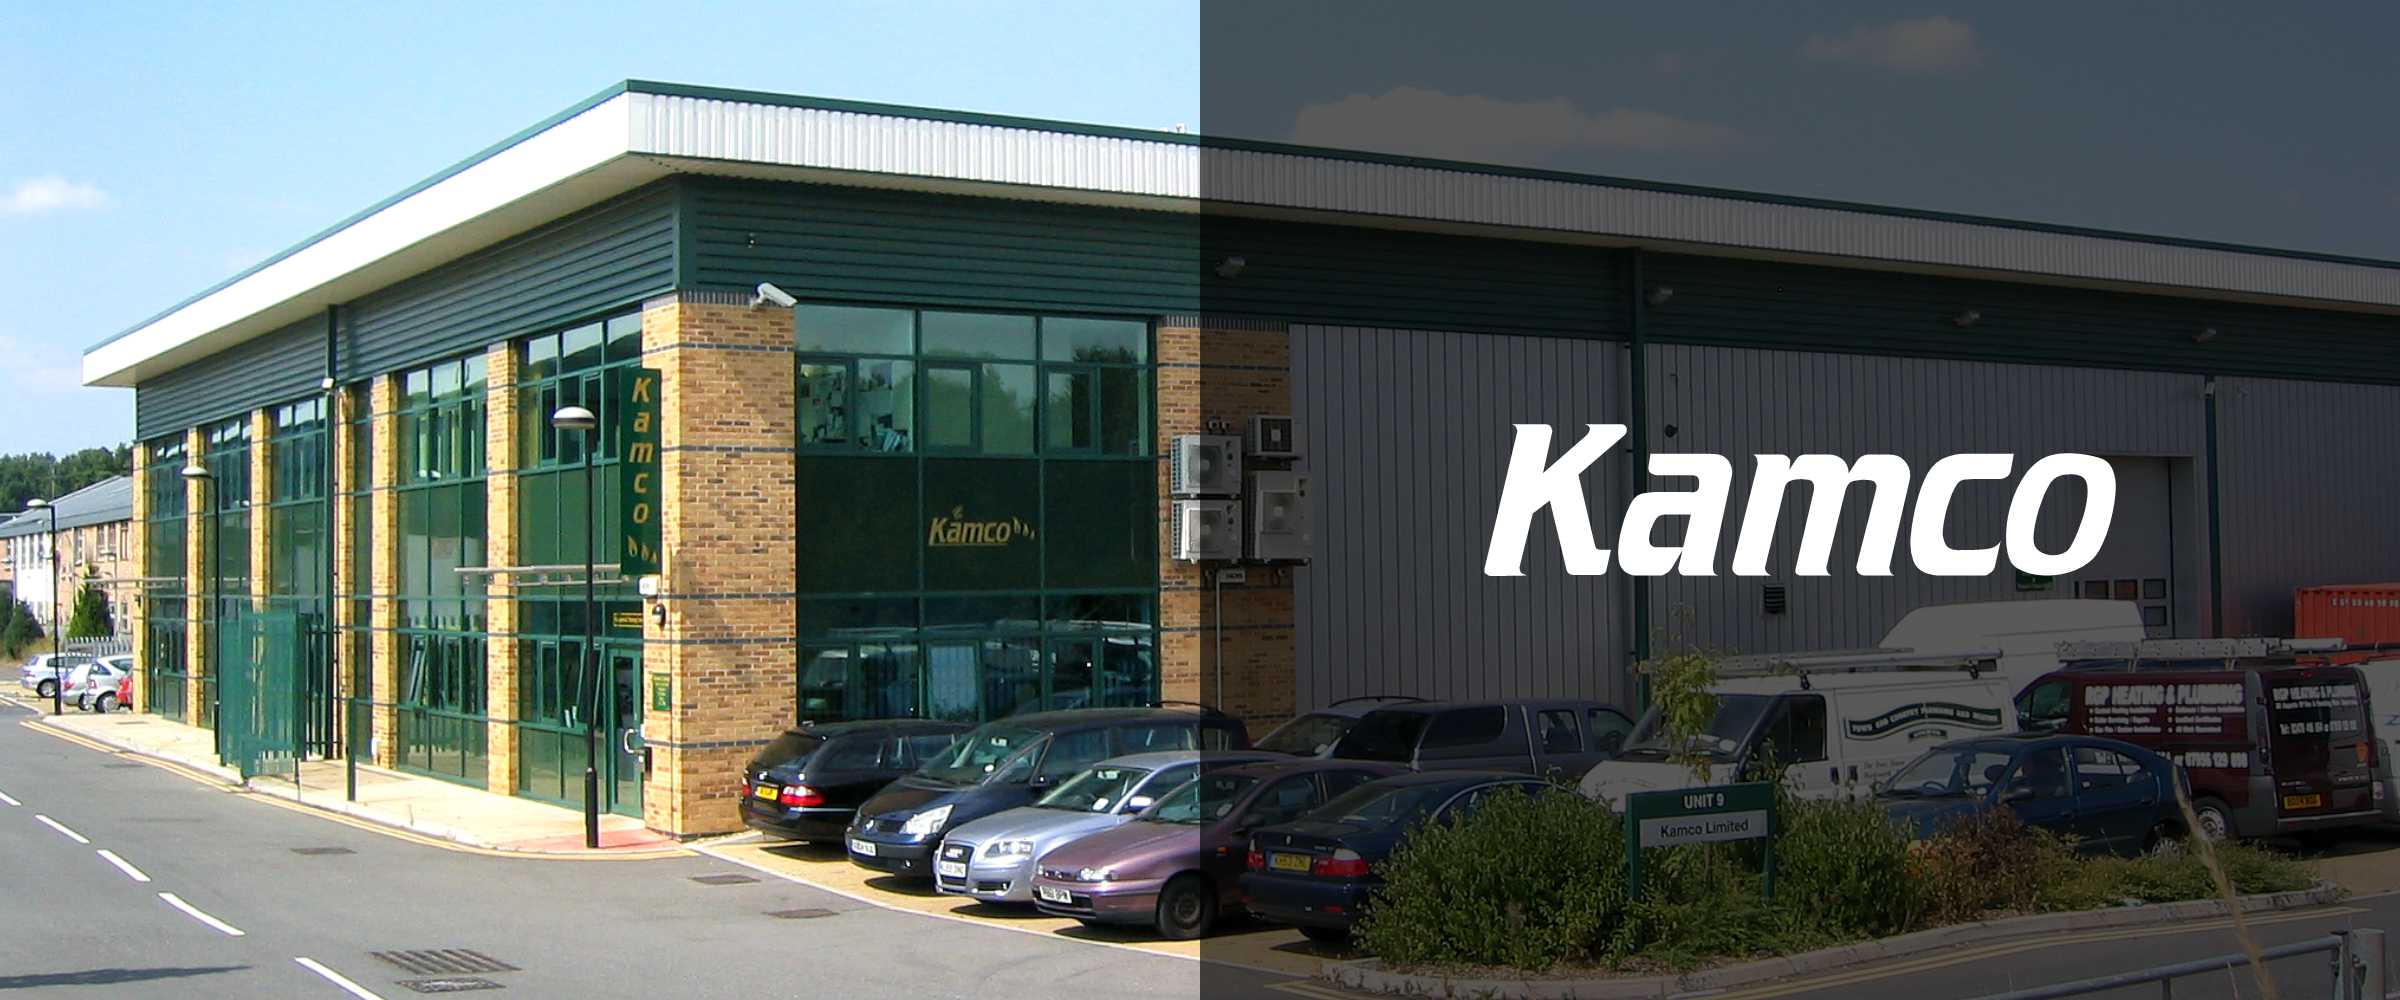 Kamco's HQ, a rectangular building with cars parked outside